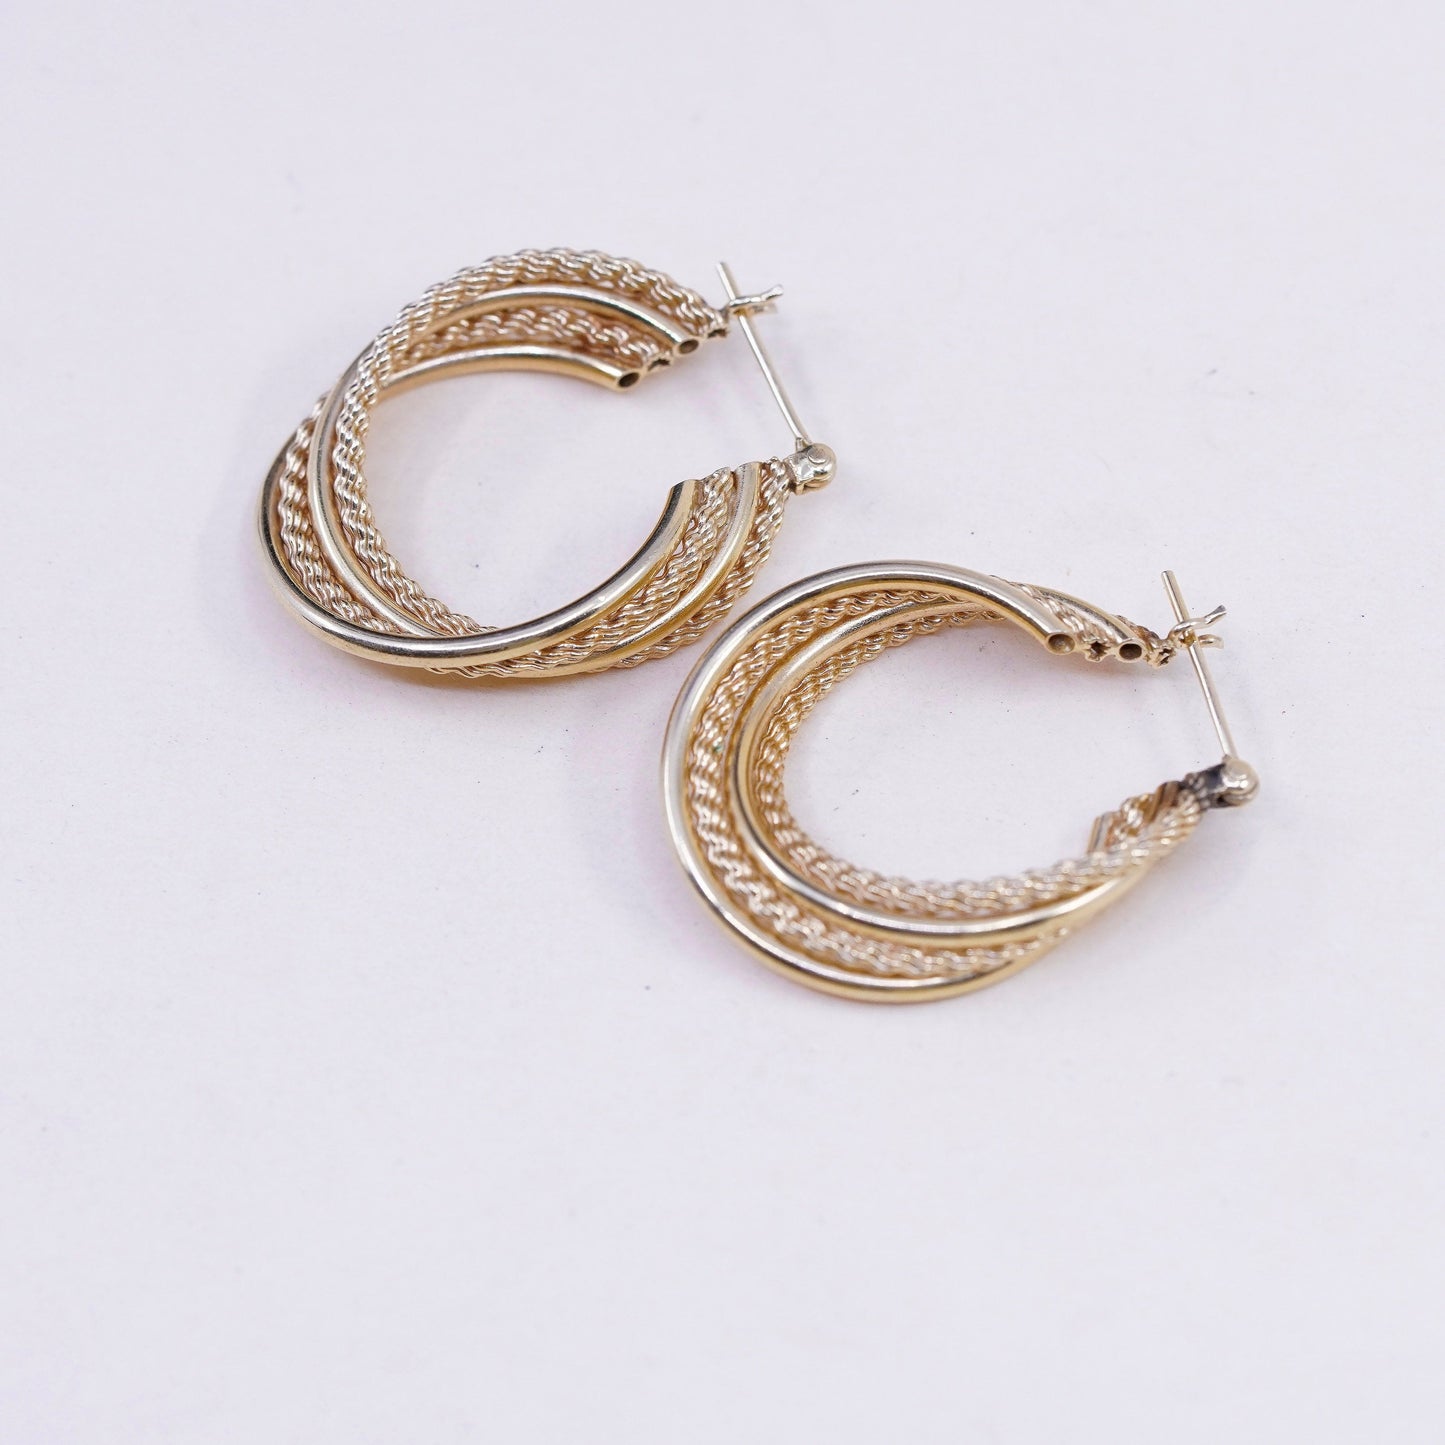 1.25”, 5.2g, Vintage real 14K gold hoops earrings, yellow gold entwined huggie